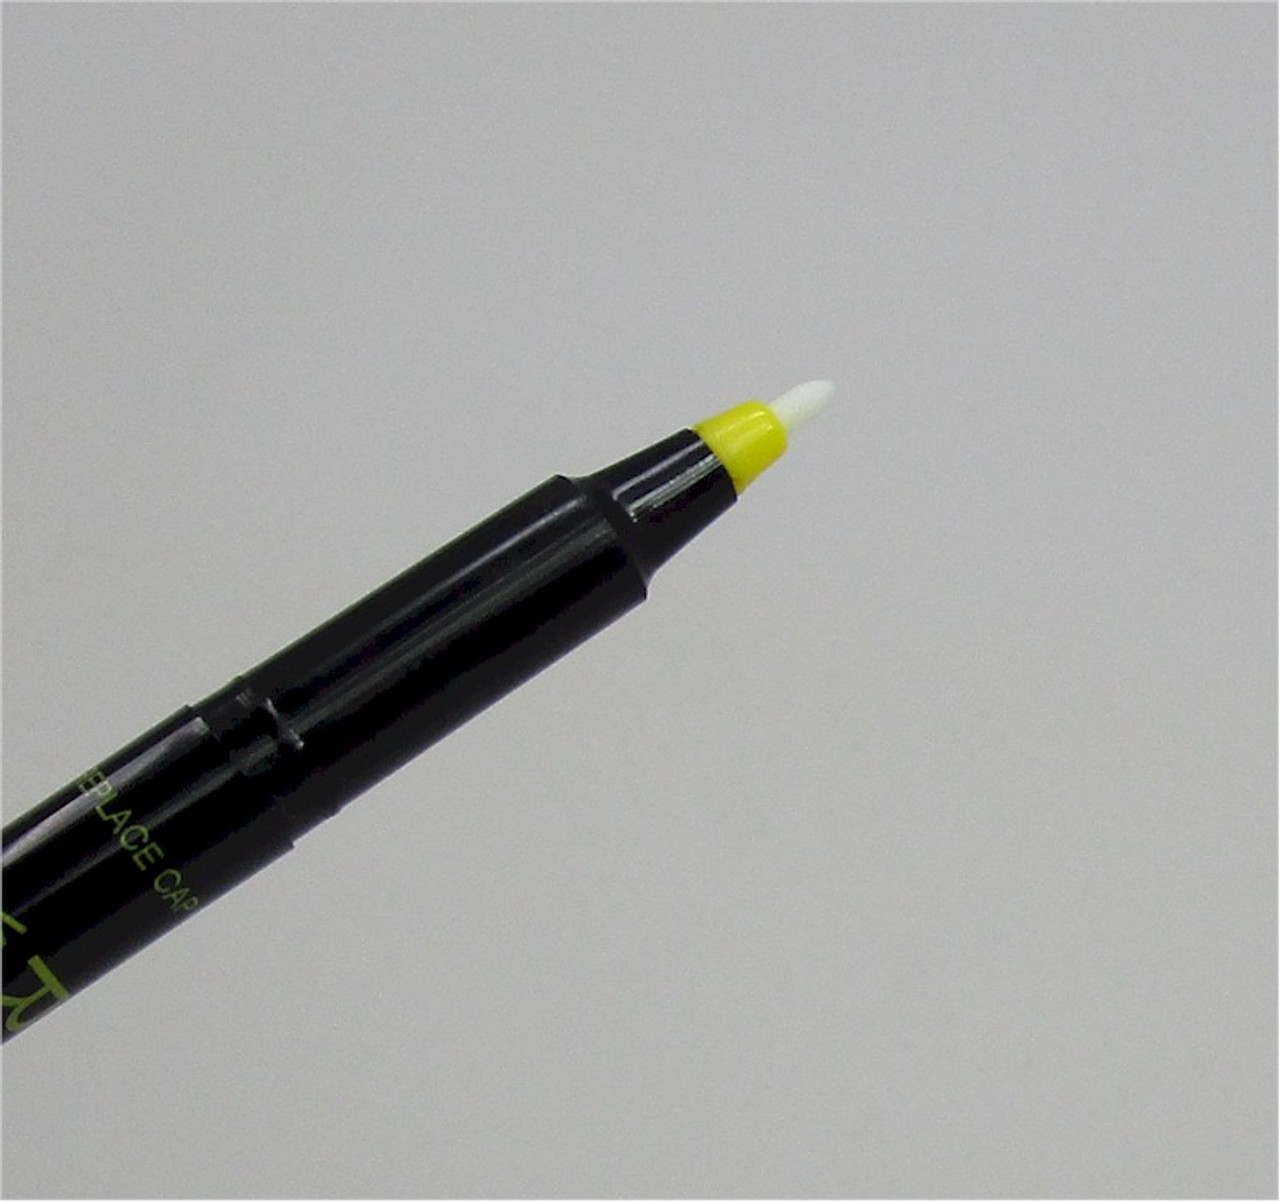 Marker for writing on nearly any surface: All about the uses of universal  pens